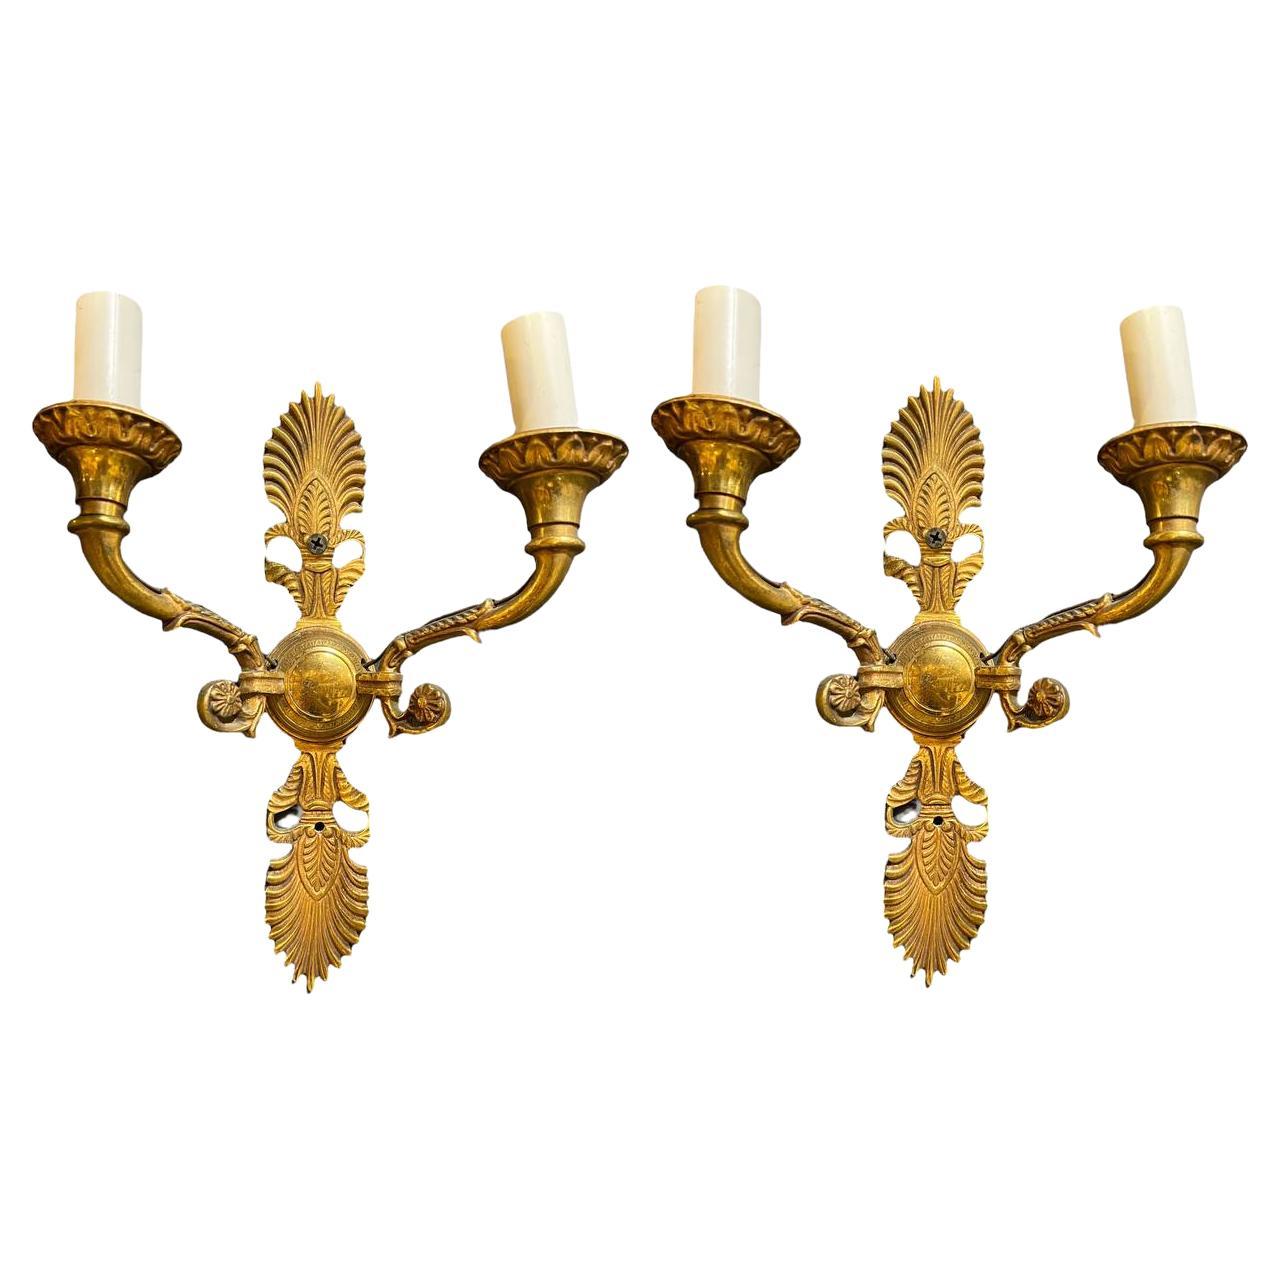 1900's French Empire Style Small Sconces For Sale